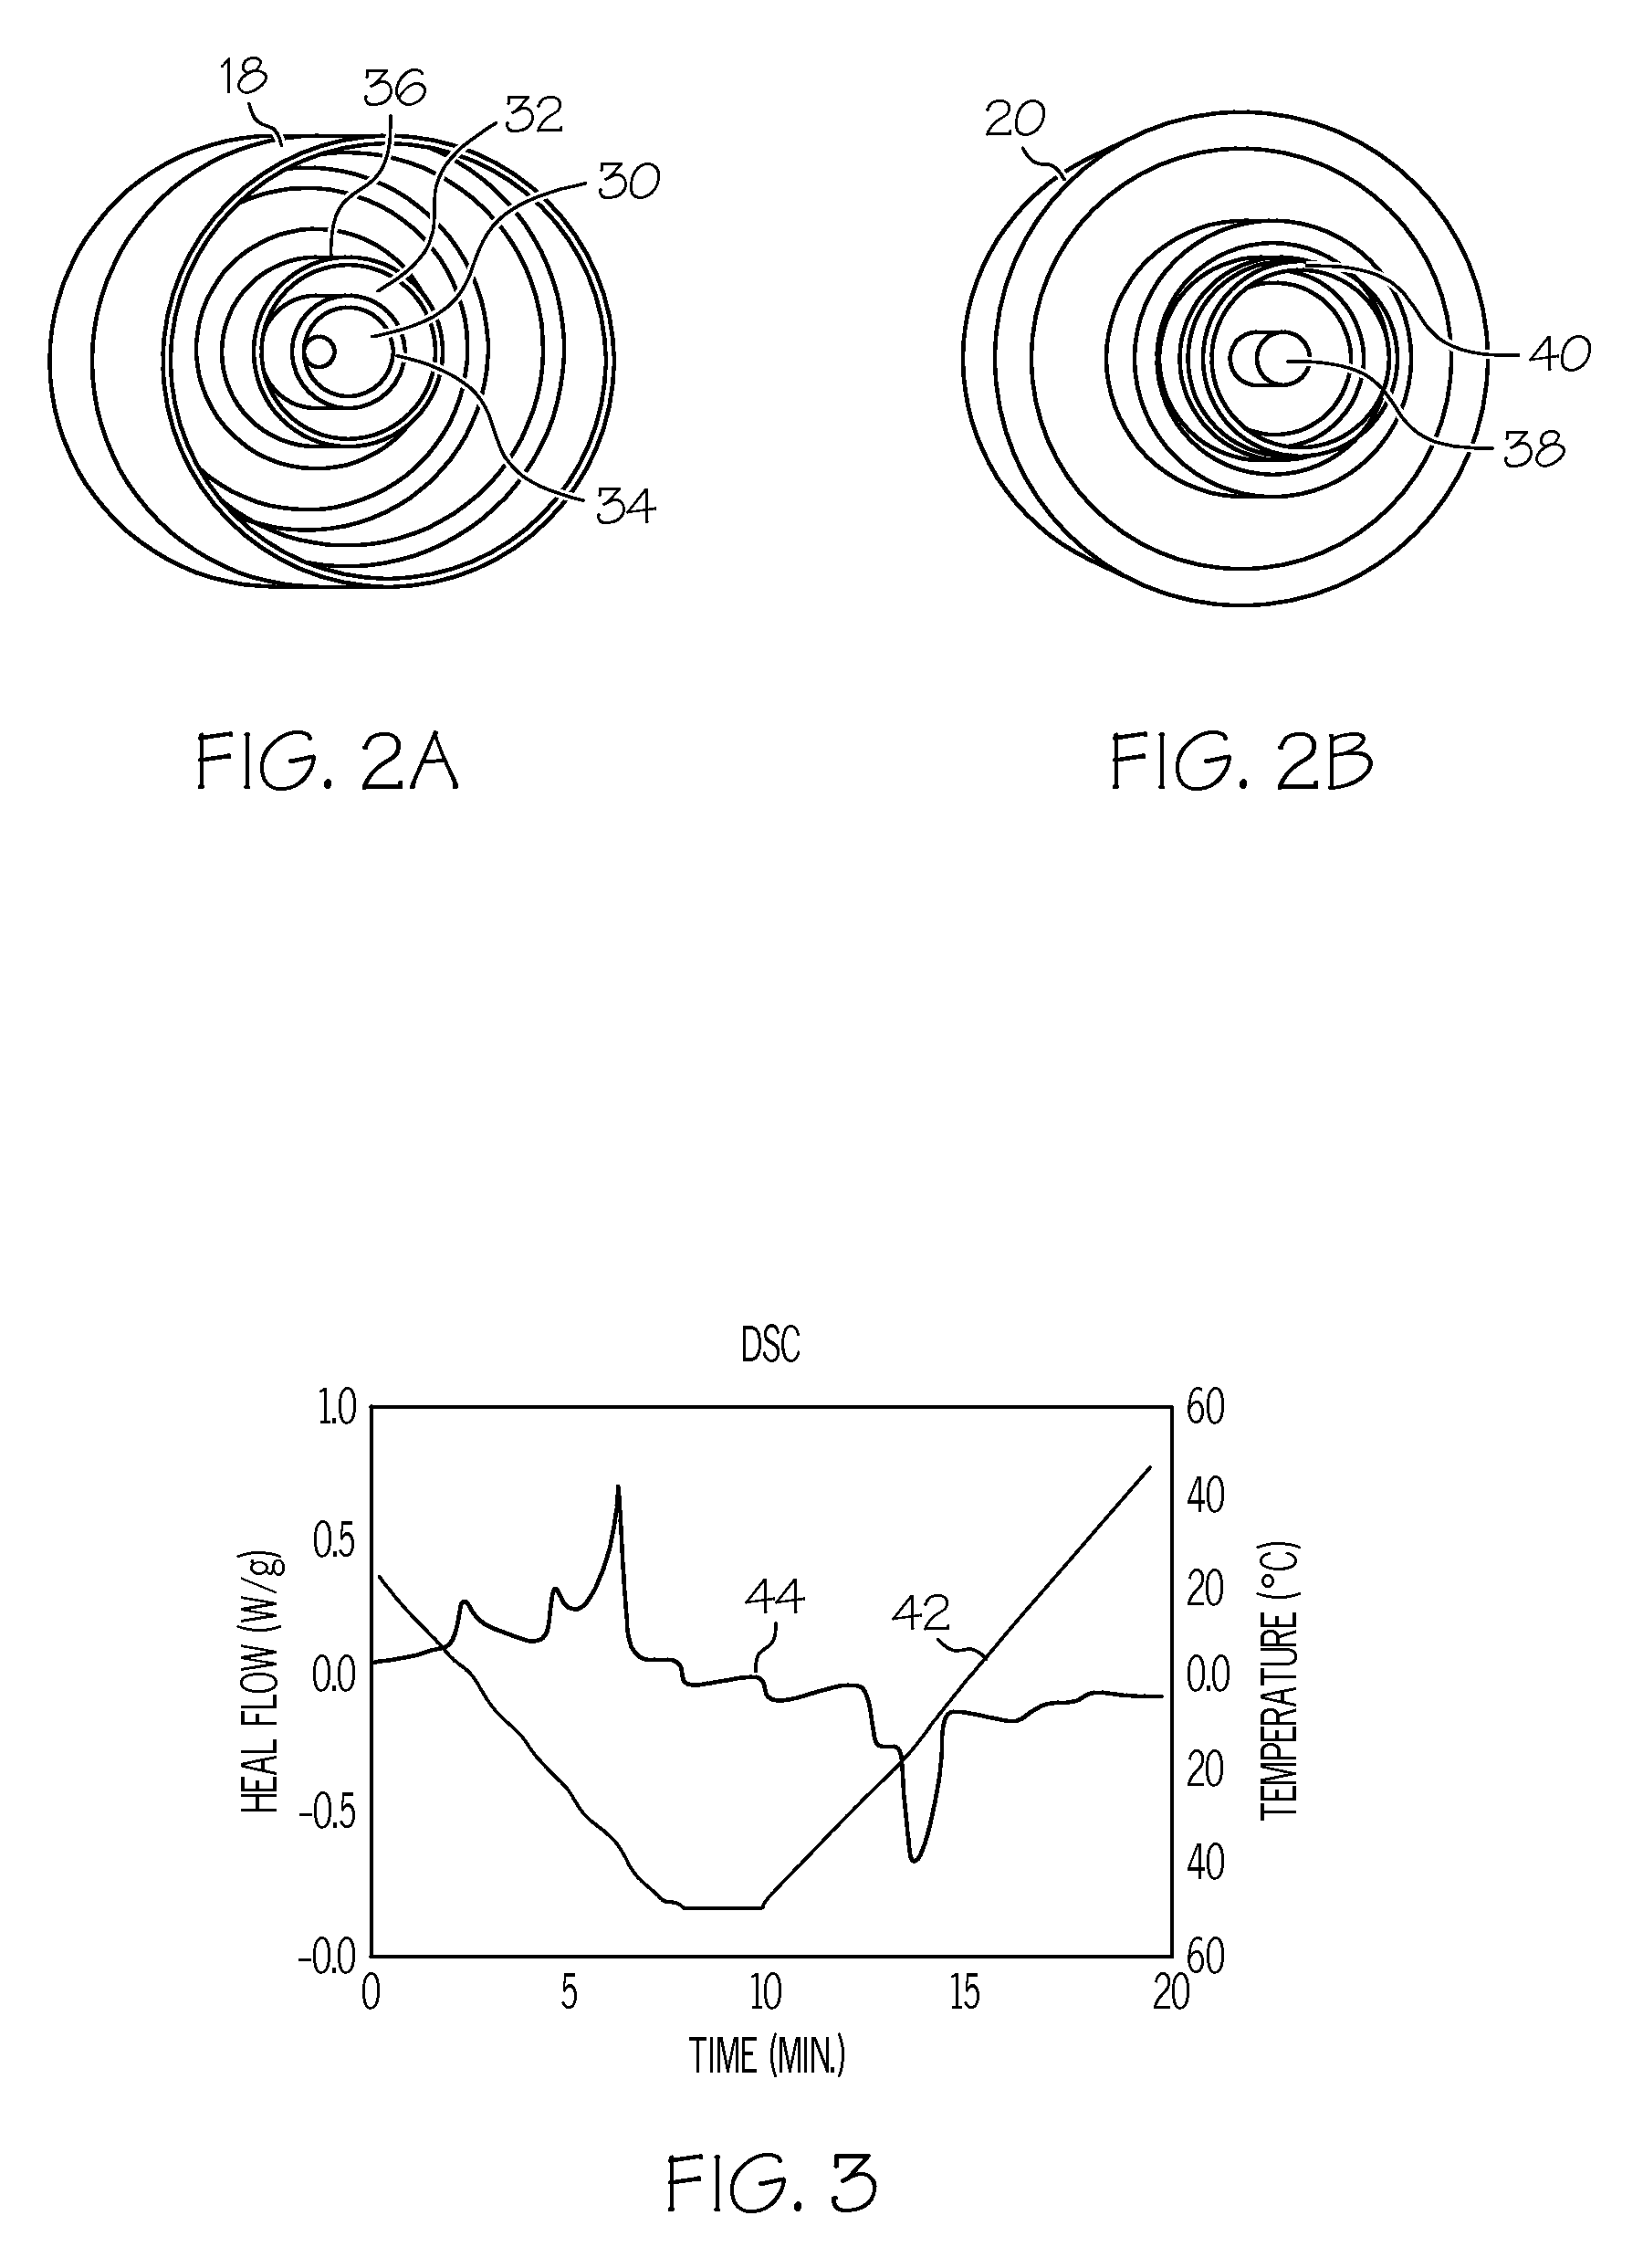 Liquid metal rotary connector apparatus for a vehicle steering wheel and column